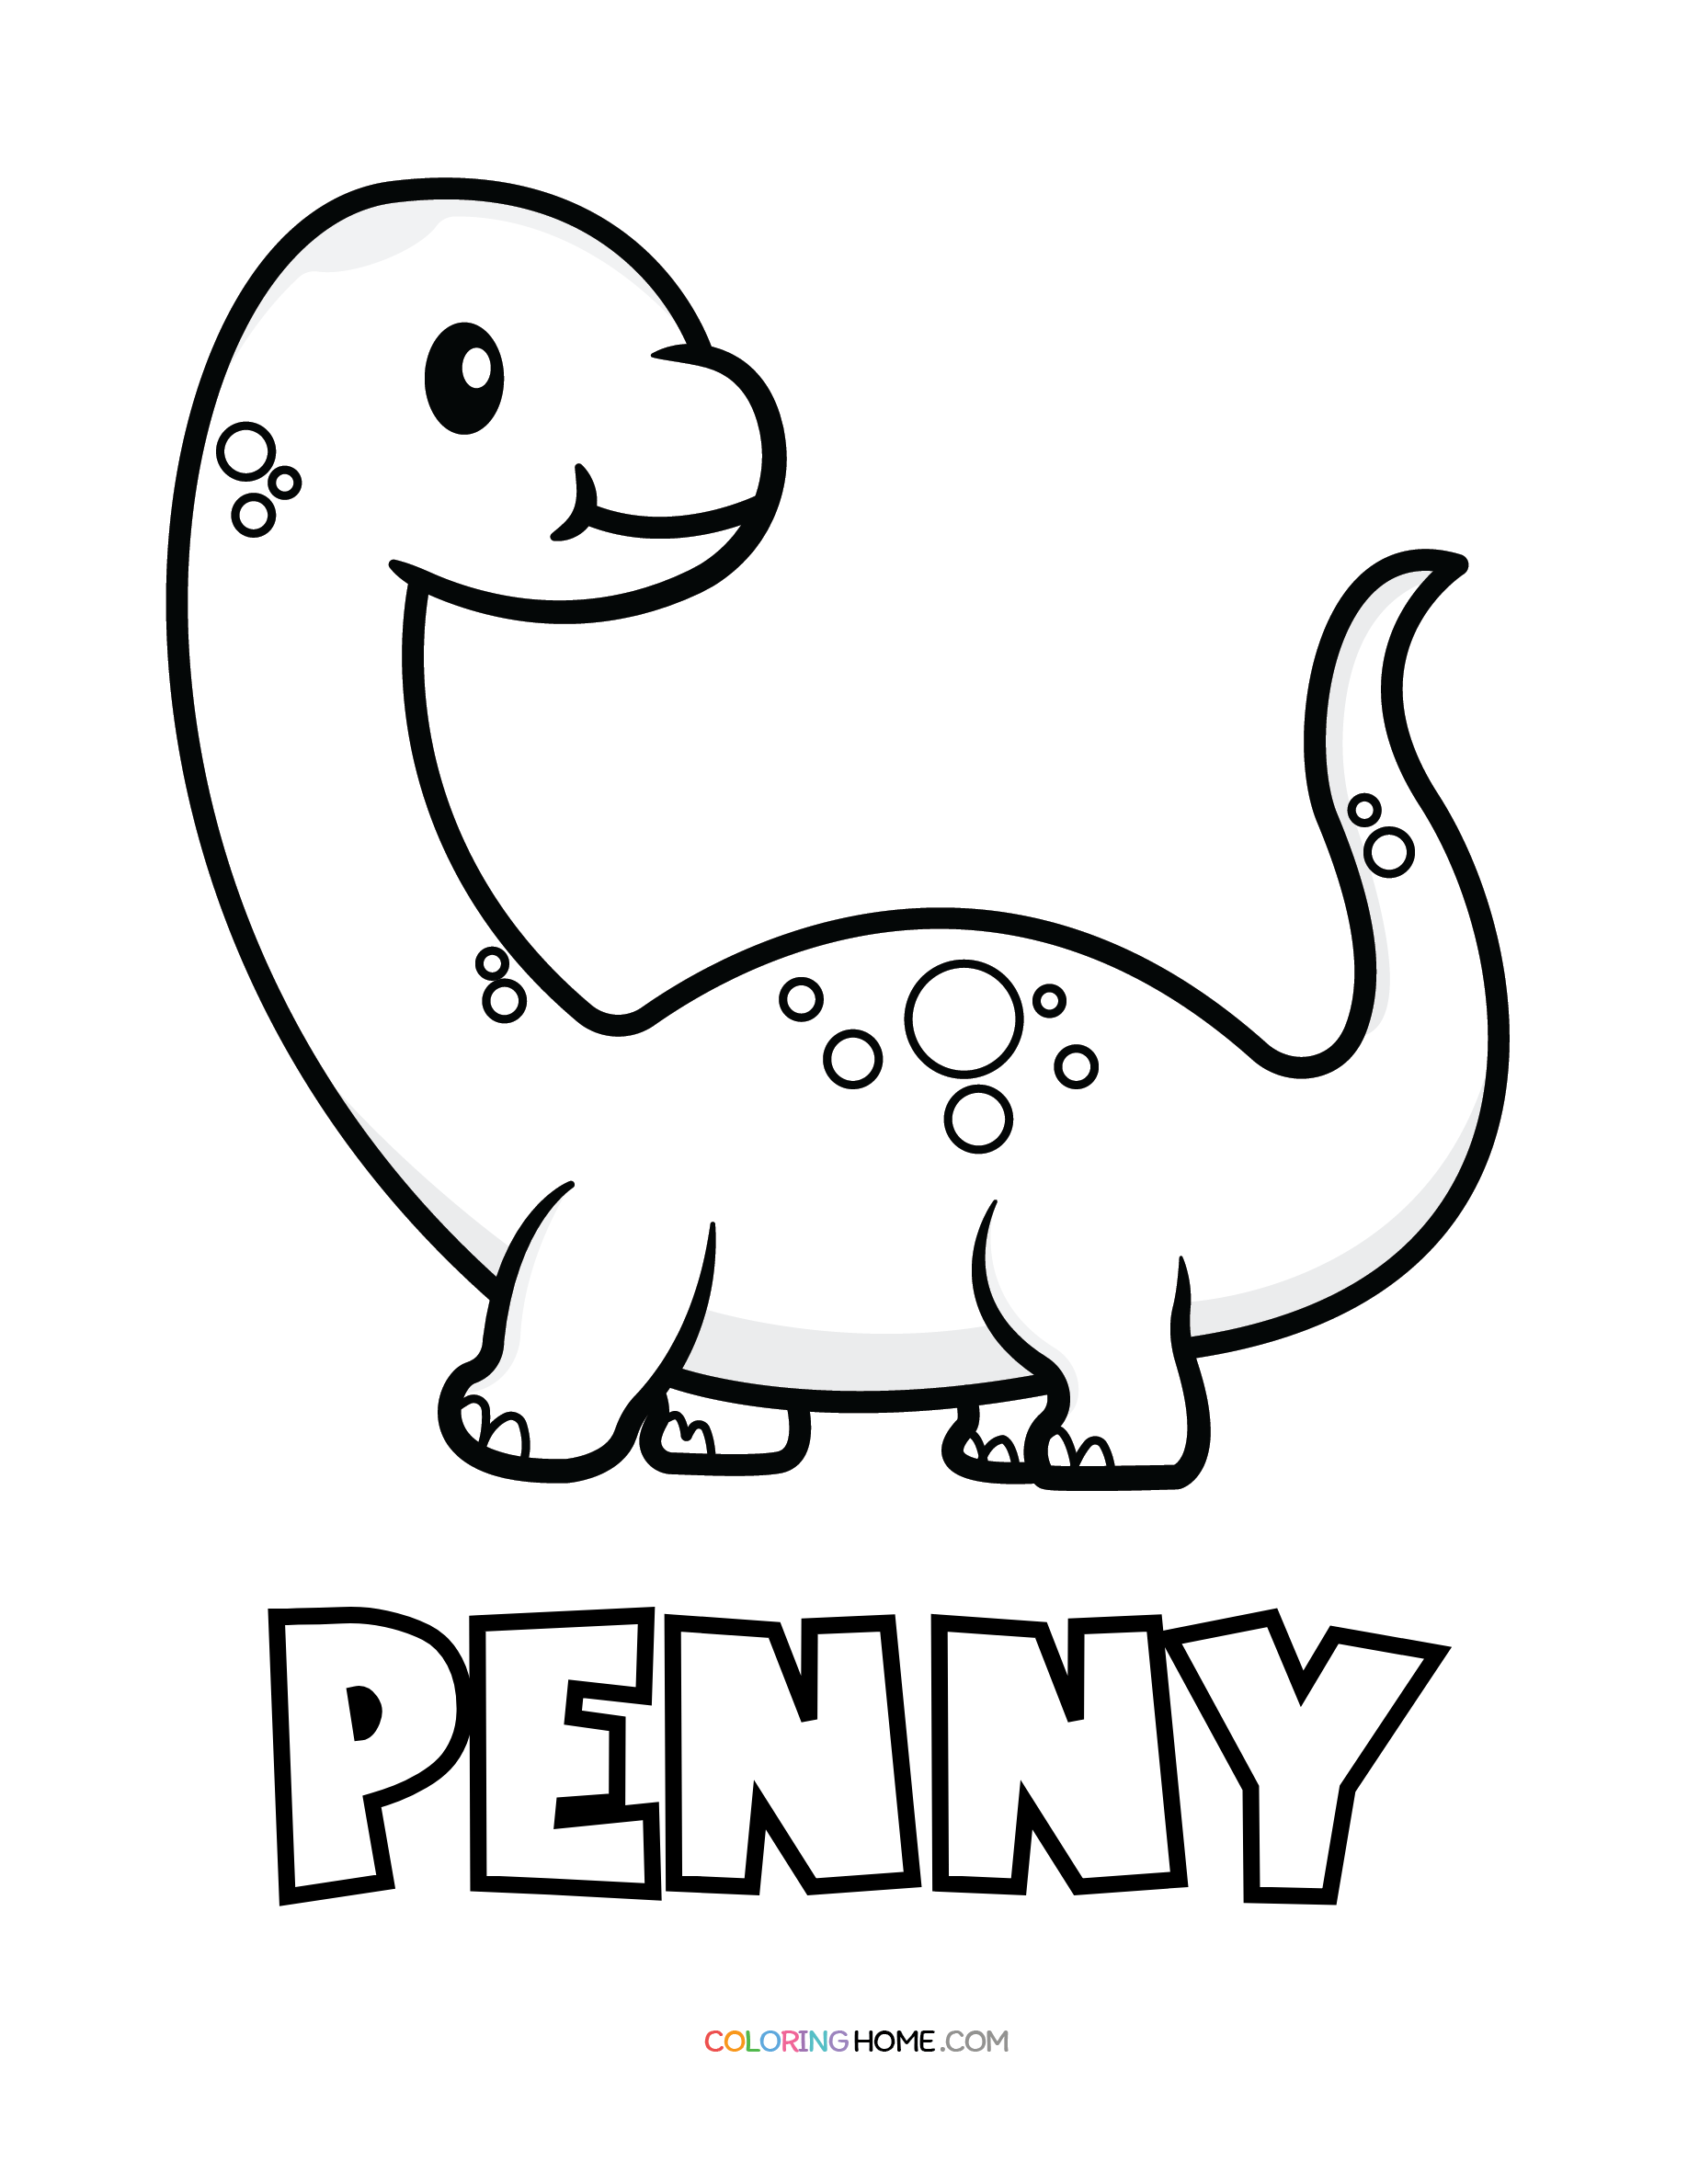 Penny dinosaur coloring page